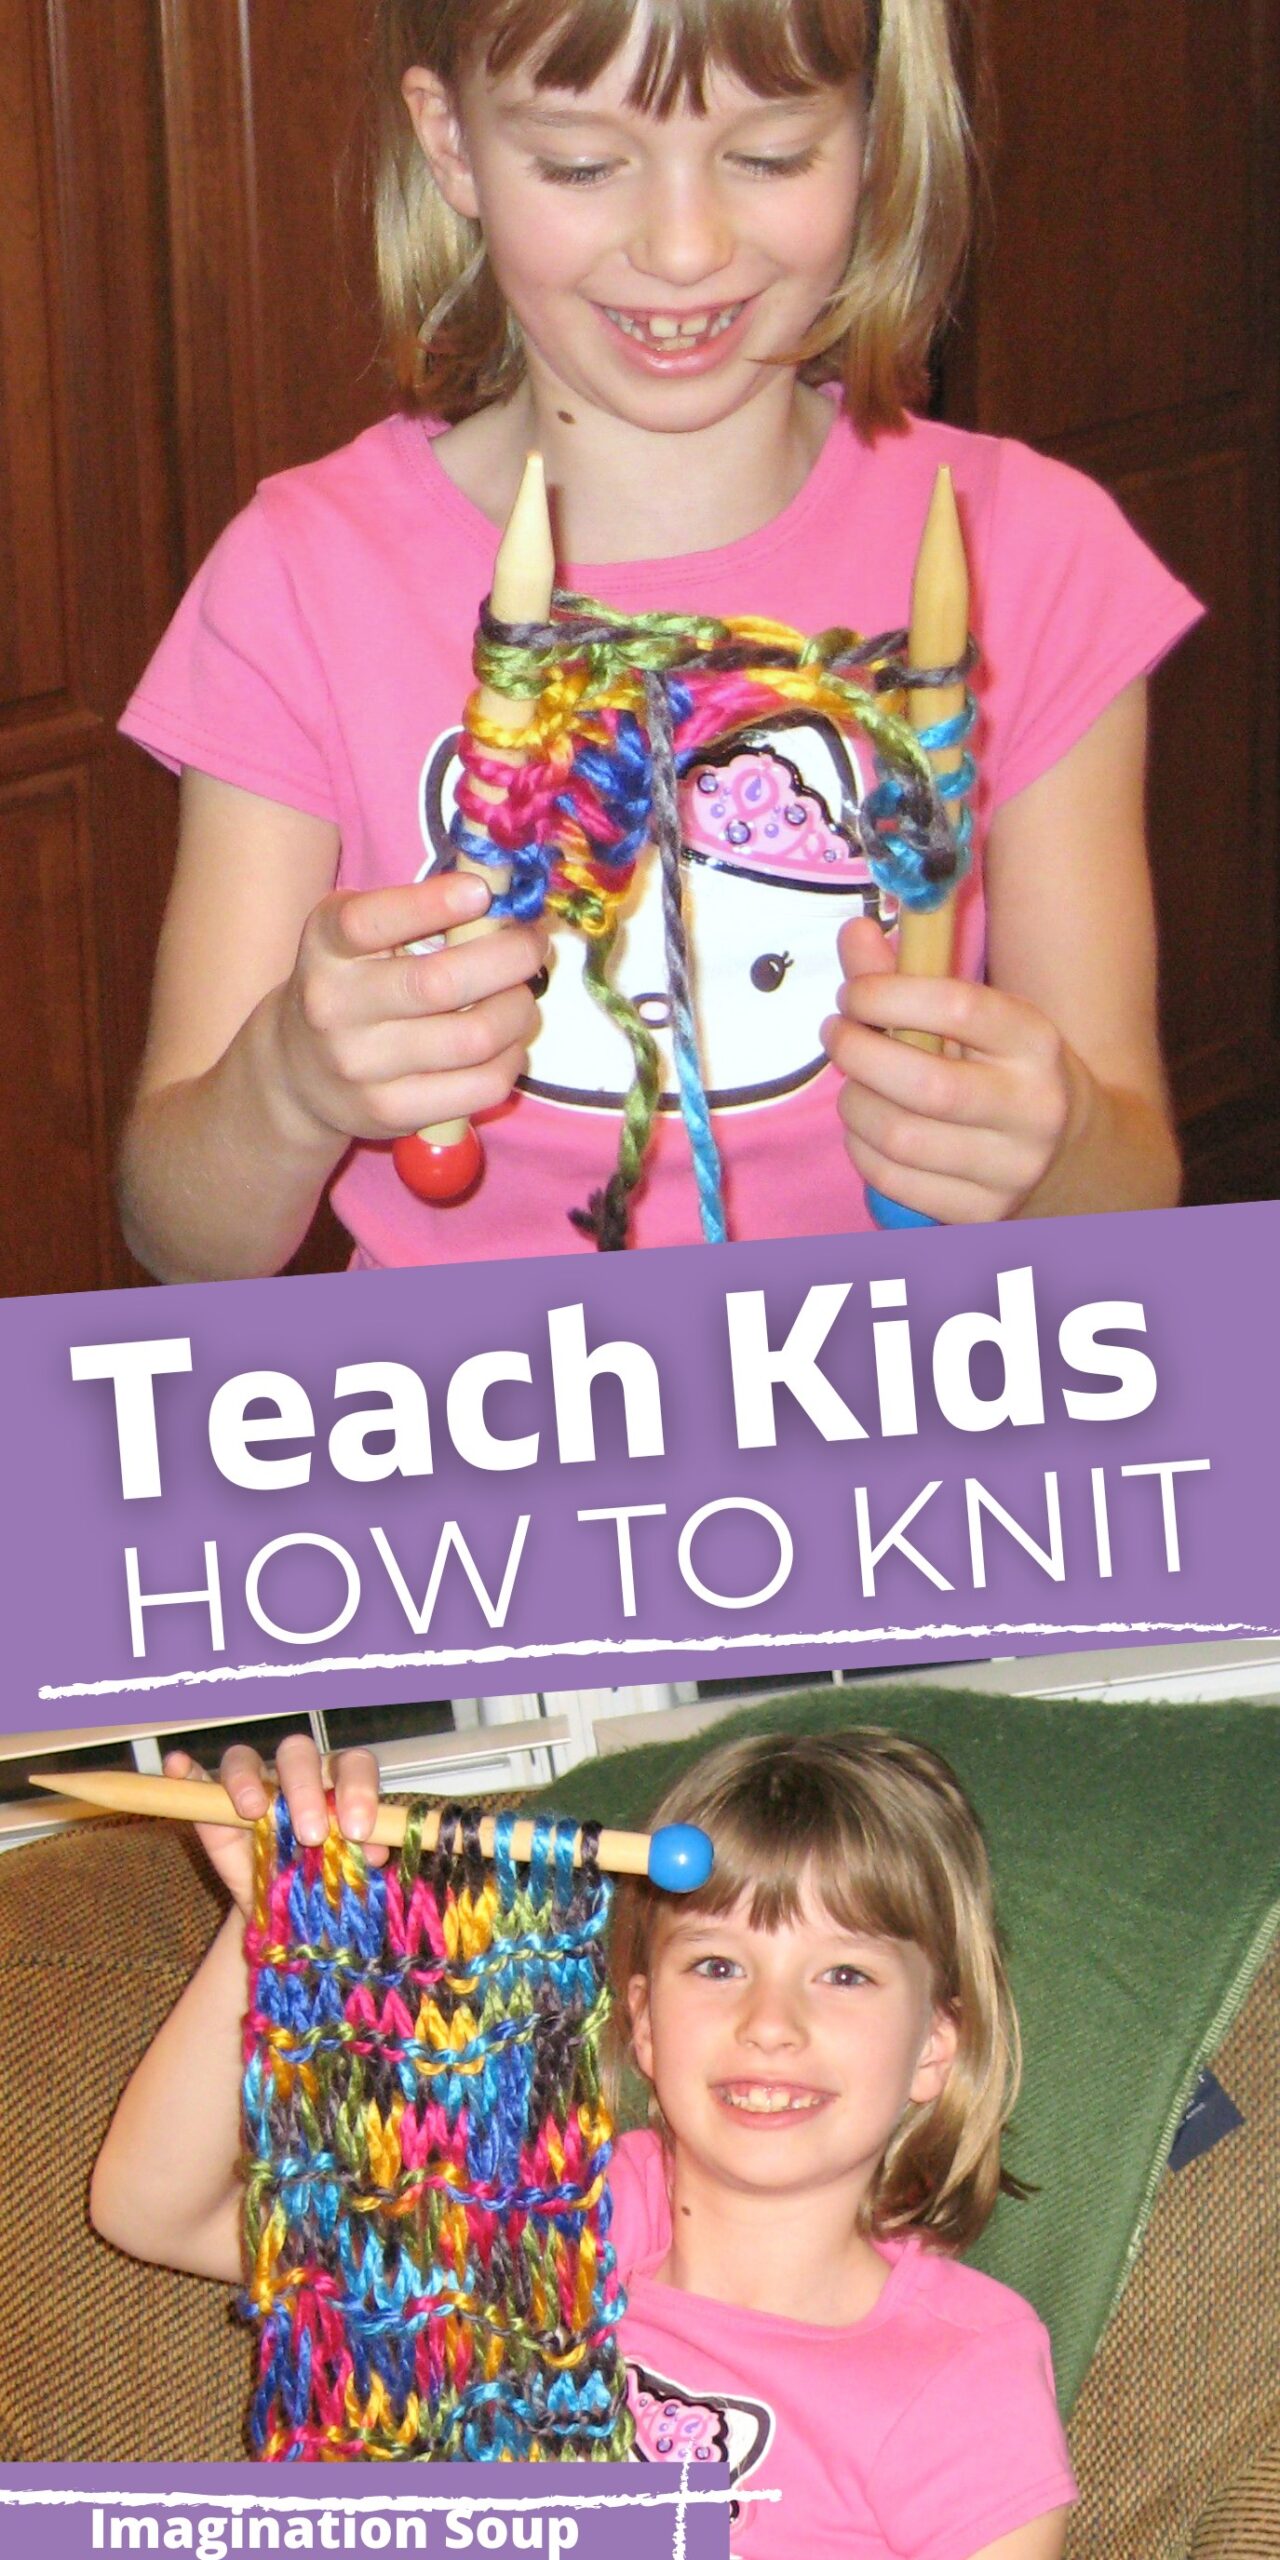 Do you want to learn how to teach kids how to knit? Knitting develops fine motor skills and attention span. All you need are colorful yarns, big needles, time, and patience -- plus a few tips and a fun rhyme which I'll share with you below.